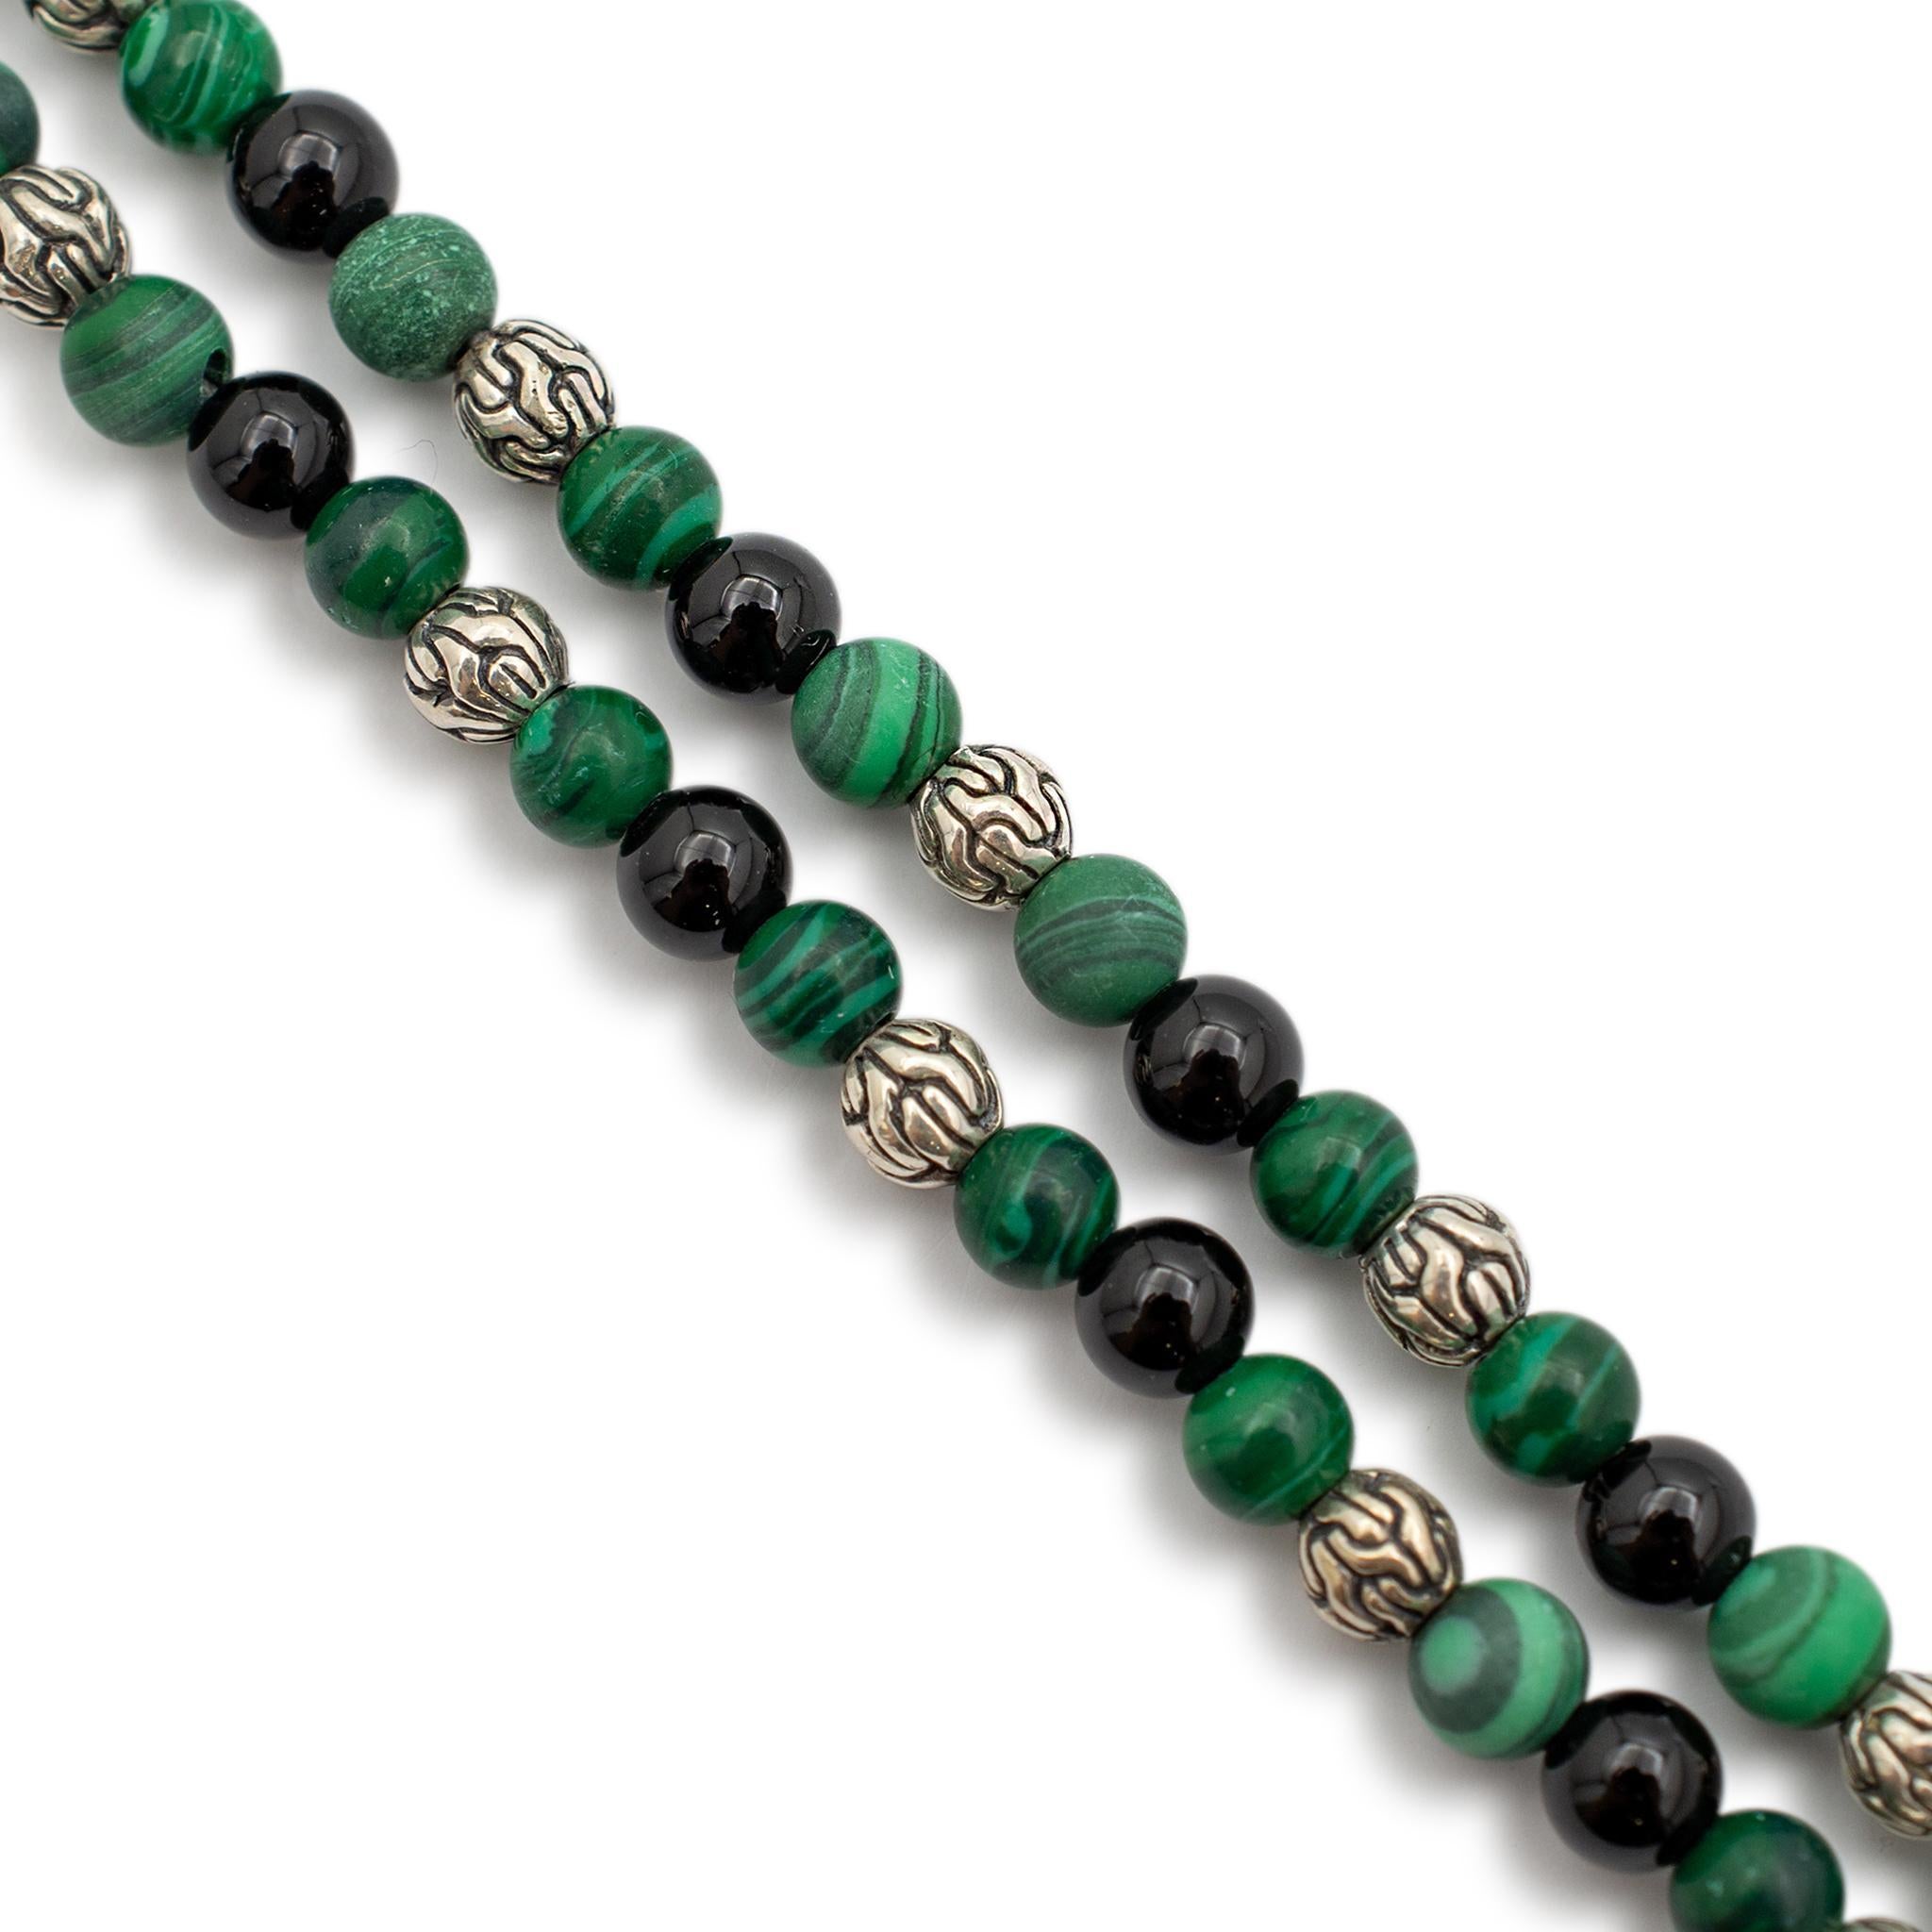 Gender: Ladies

Metal Type: 18K White Gold

Length: 19.5 inches to 23 inches

Width: 4.30 mm

Diameter: 11.30 mm

Weight: 21.30 grams

One designer silver single strand onyx and malachite bead necklace. The metal was tested and determined to be 925